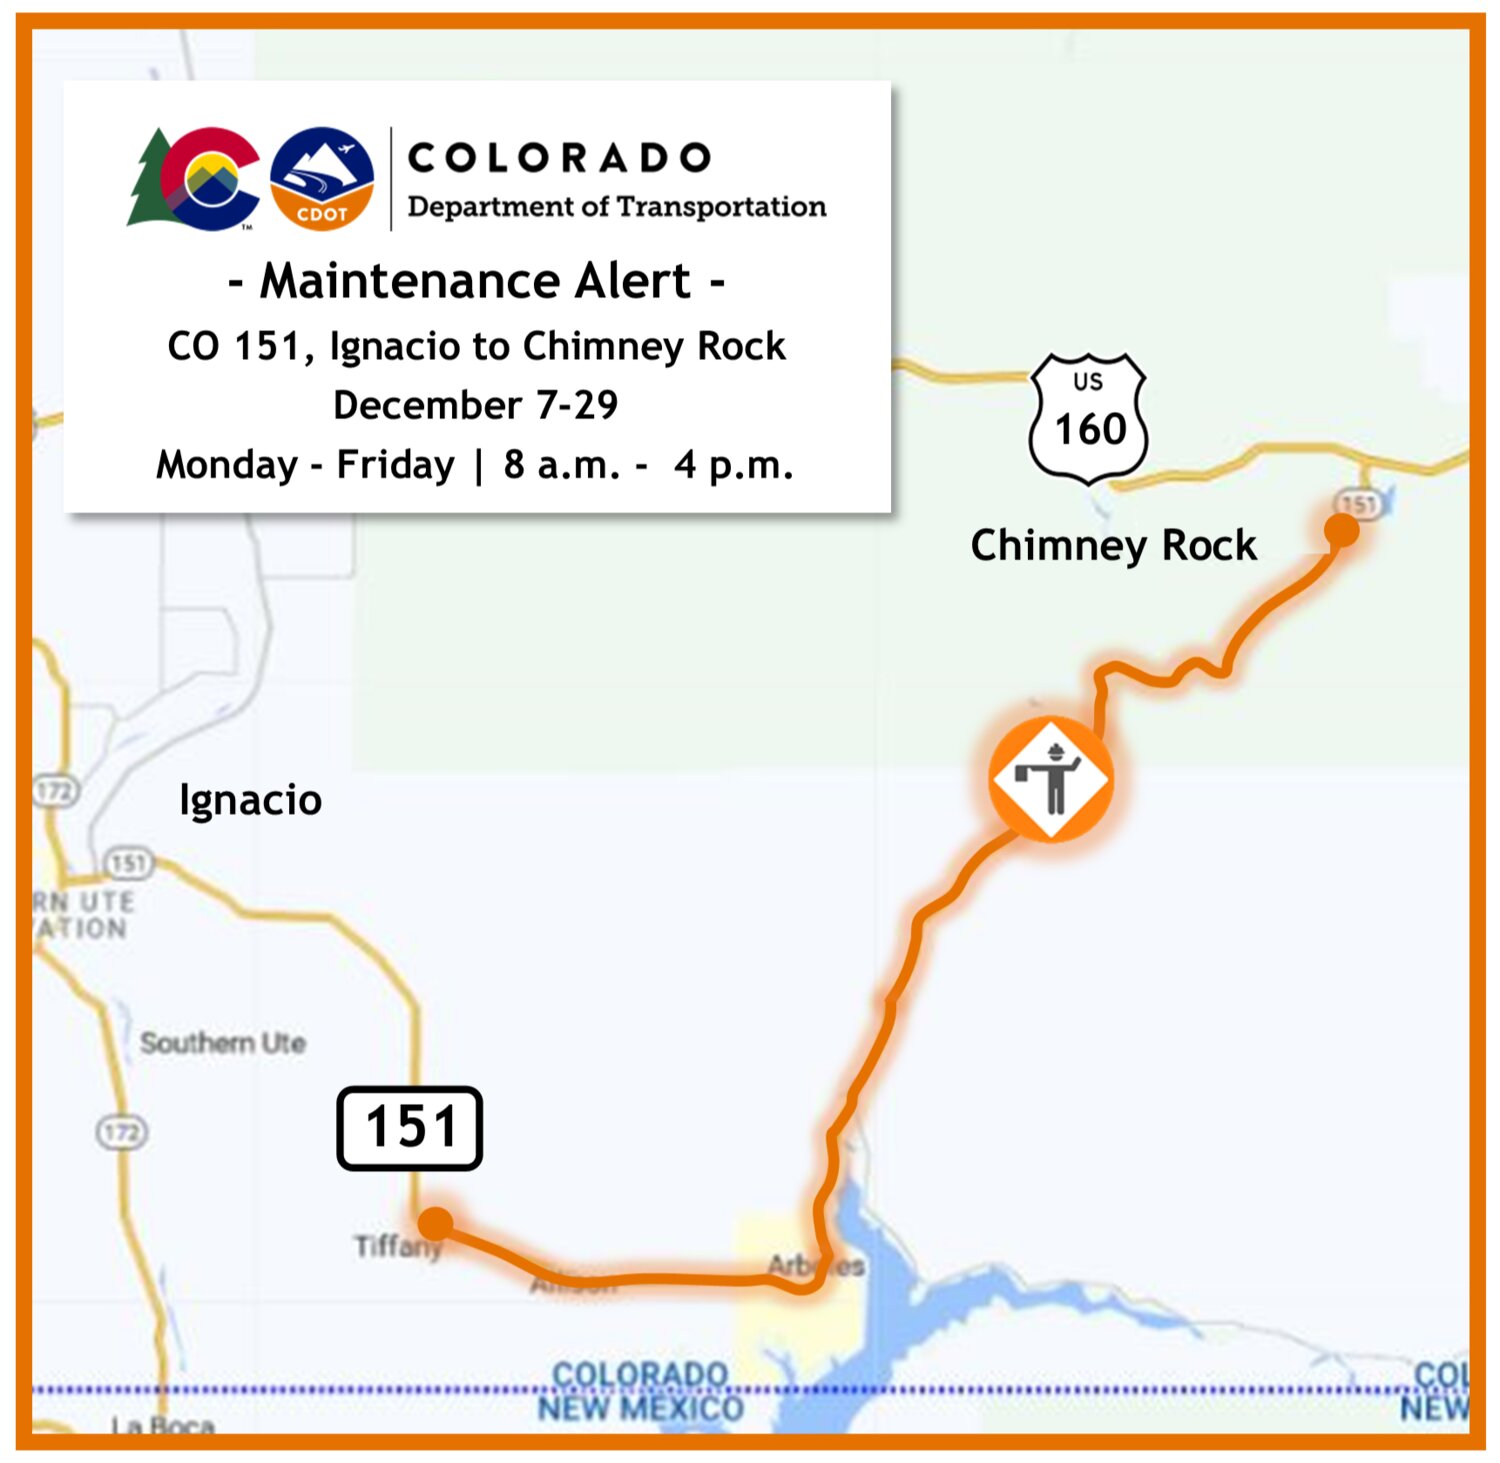 Colorado Department of Transportation maintenance crews will be repairing potholes on Colo. 151 from Dec. 7-29.  Motorists should plan for brief delays between Ignacio and Chimney Rock National Monument, Monday through Friday from 8 a.m. to 4 p.m.